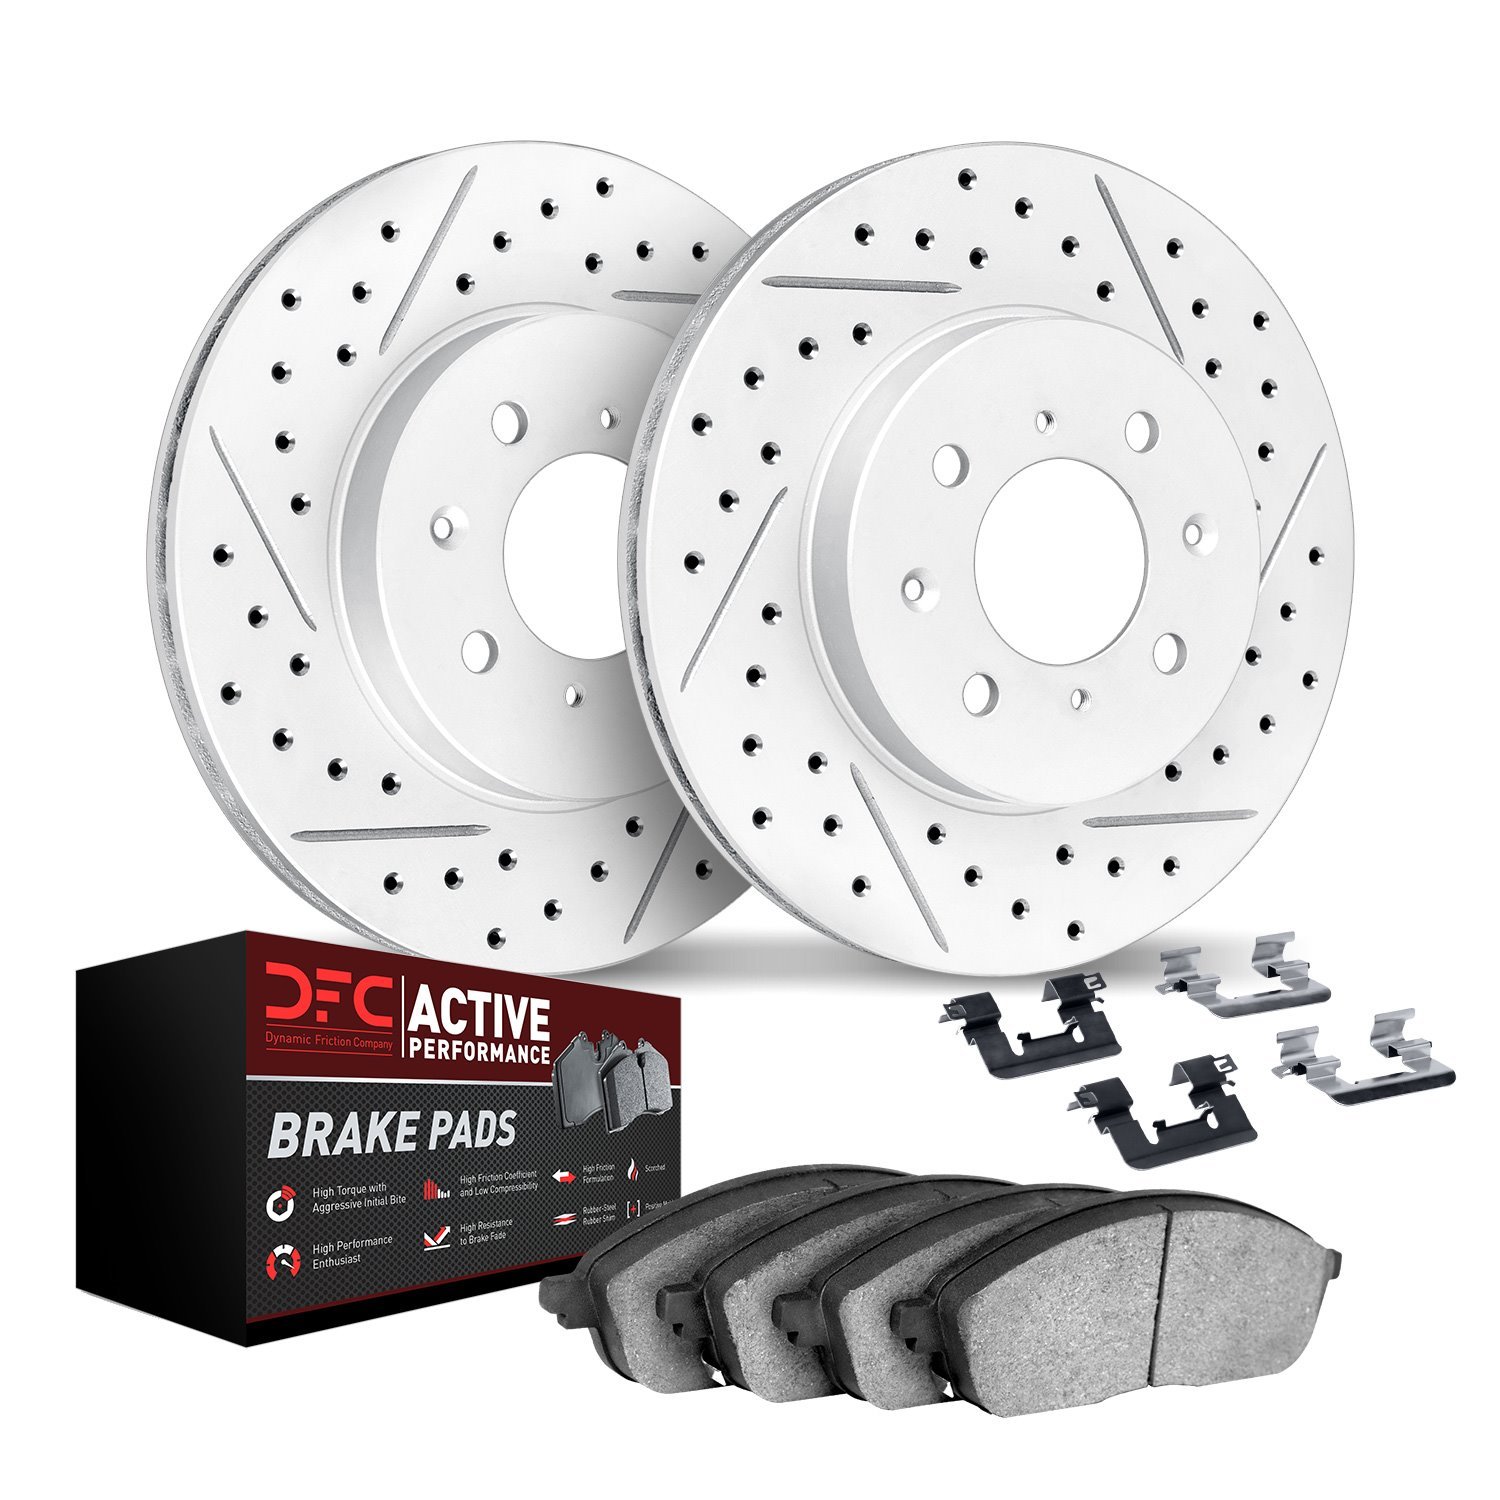 2712-54087 Geoperformance Drilled/Slotted Brake Rotors with Active Performance Pads Kit & Hardware, Fits Select Ford/Lincoln/Mer